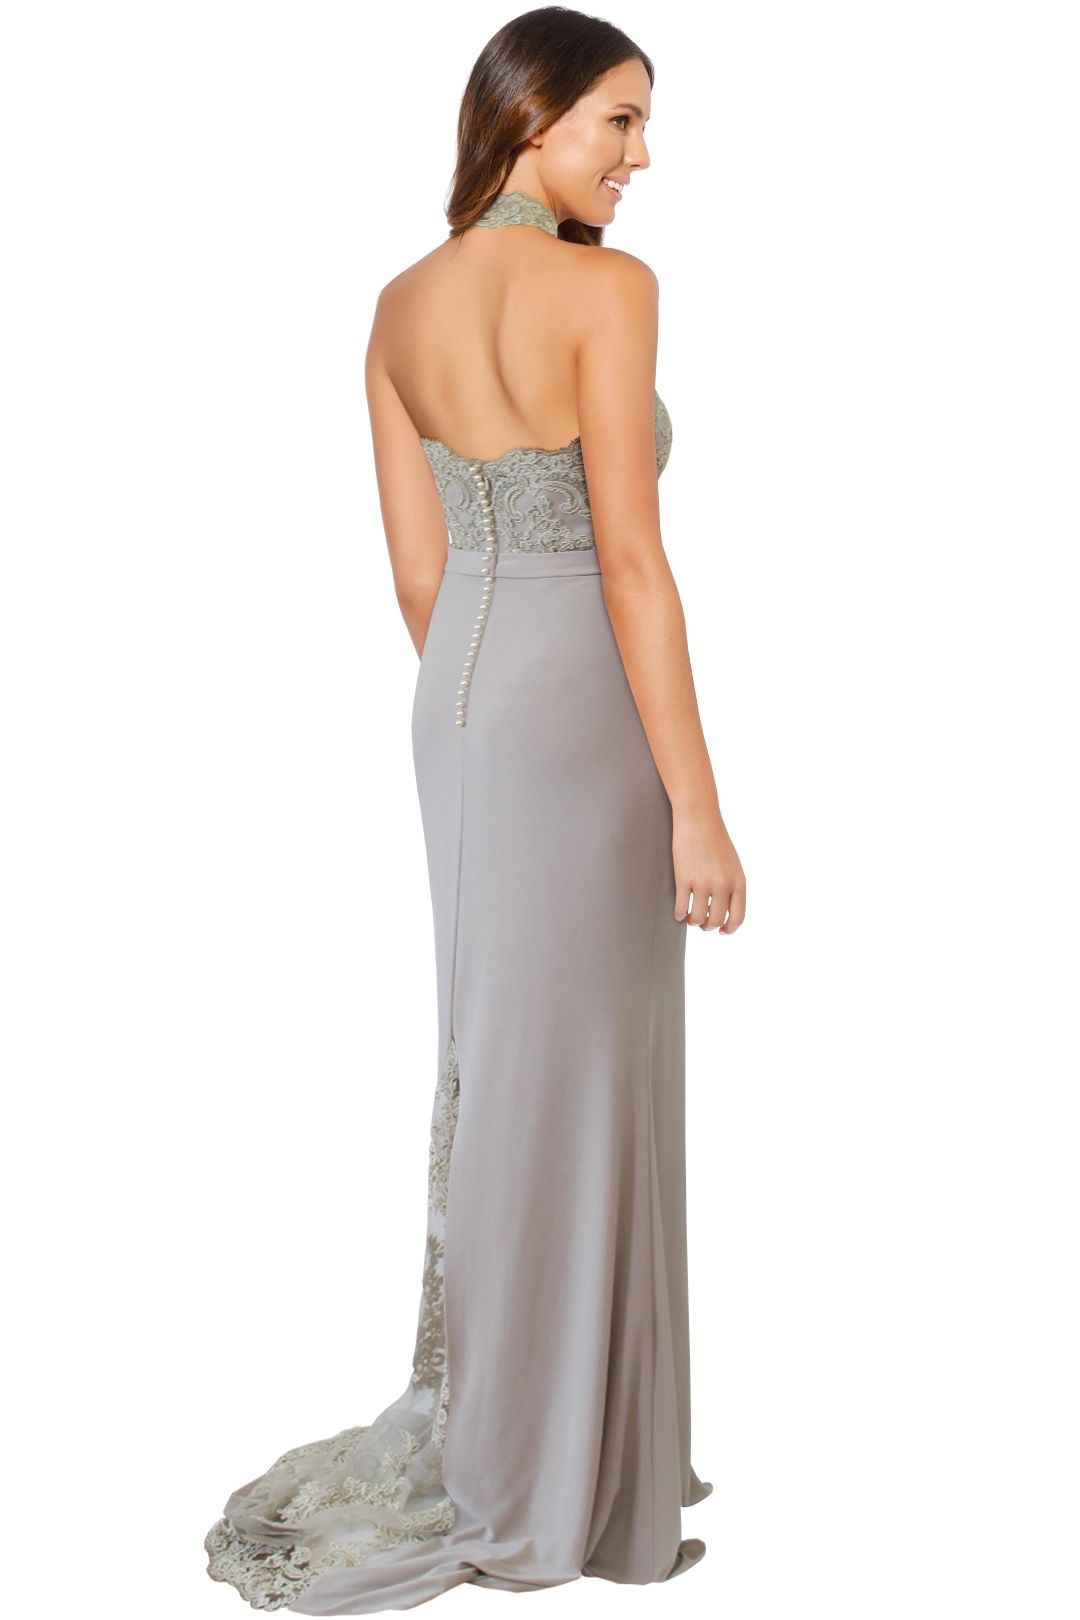 Tinaholy - Lana High Neck Gown - Sand - Back